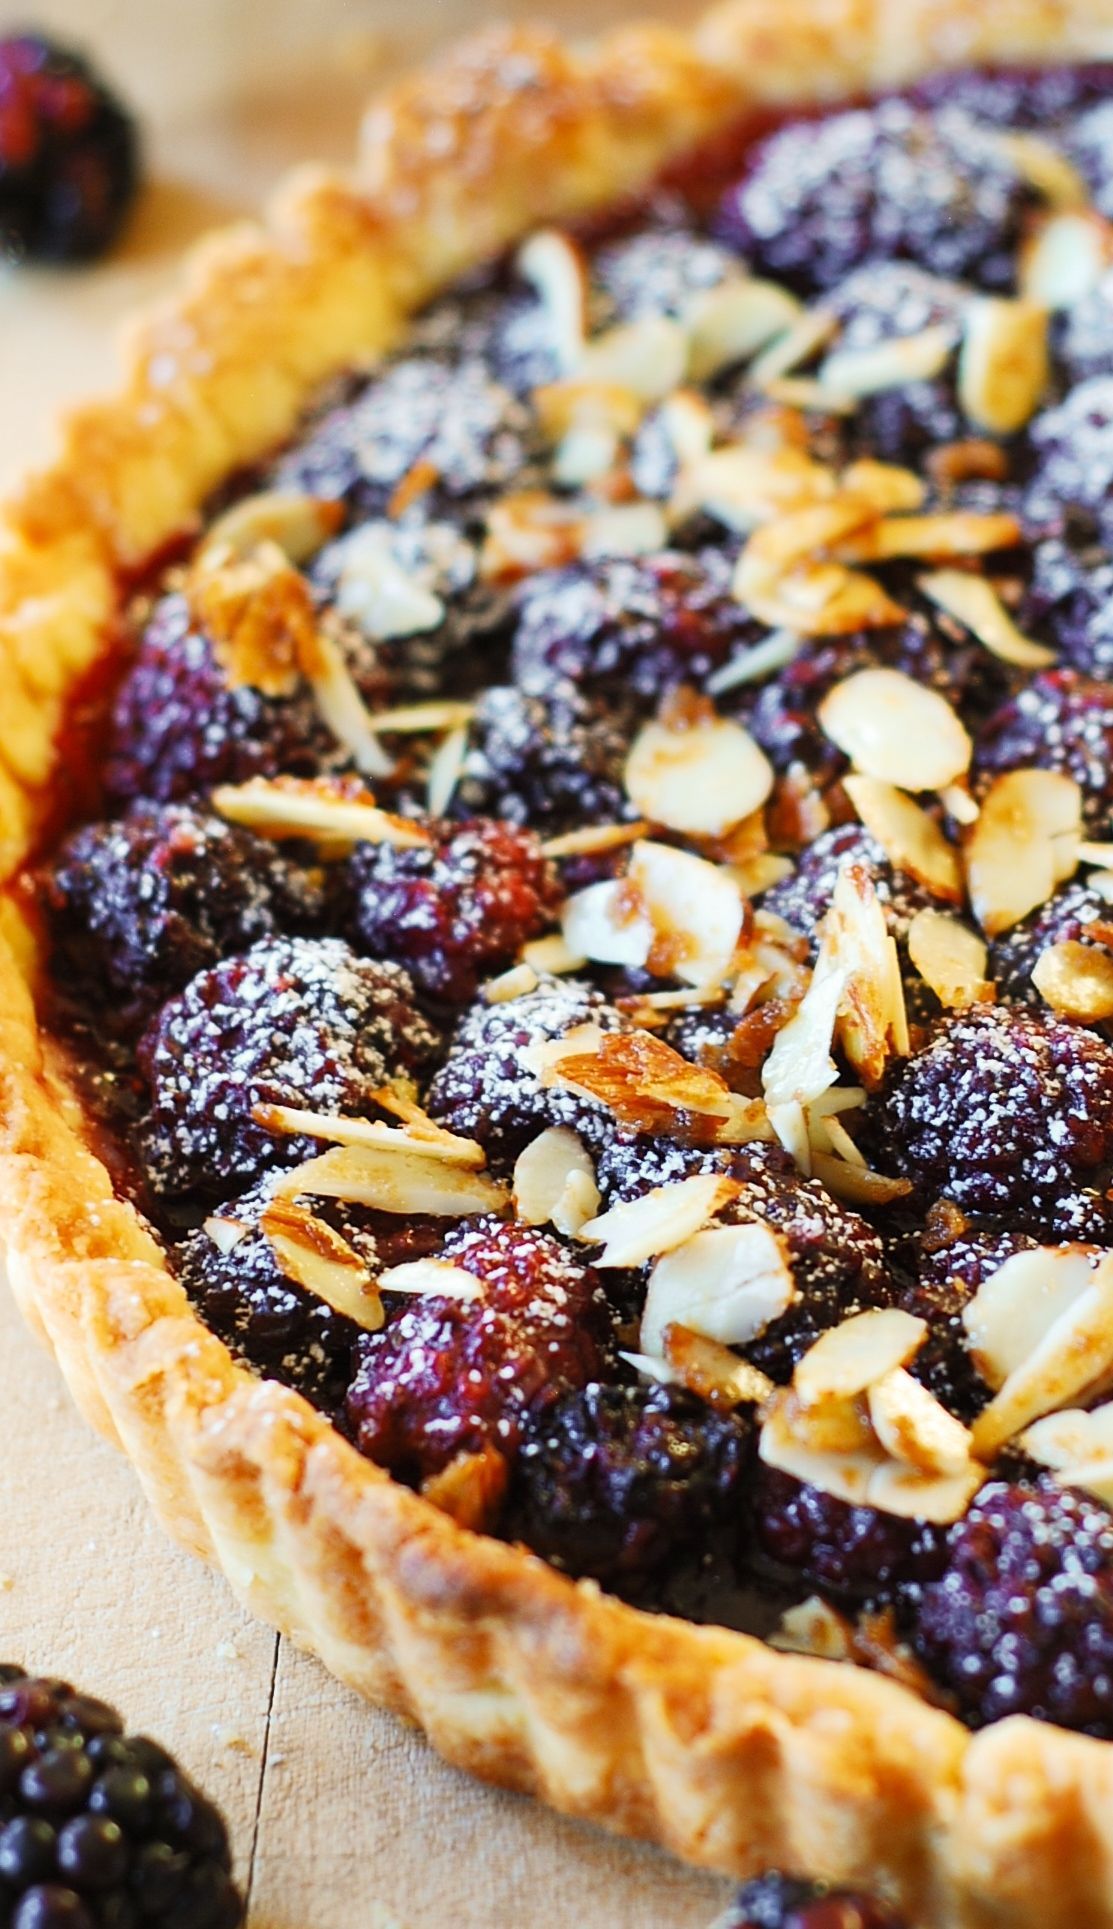 Blackberry Tart with Toasted Almonds